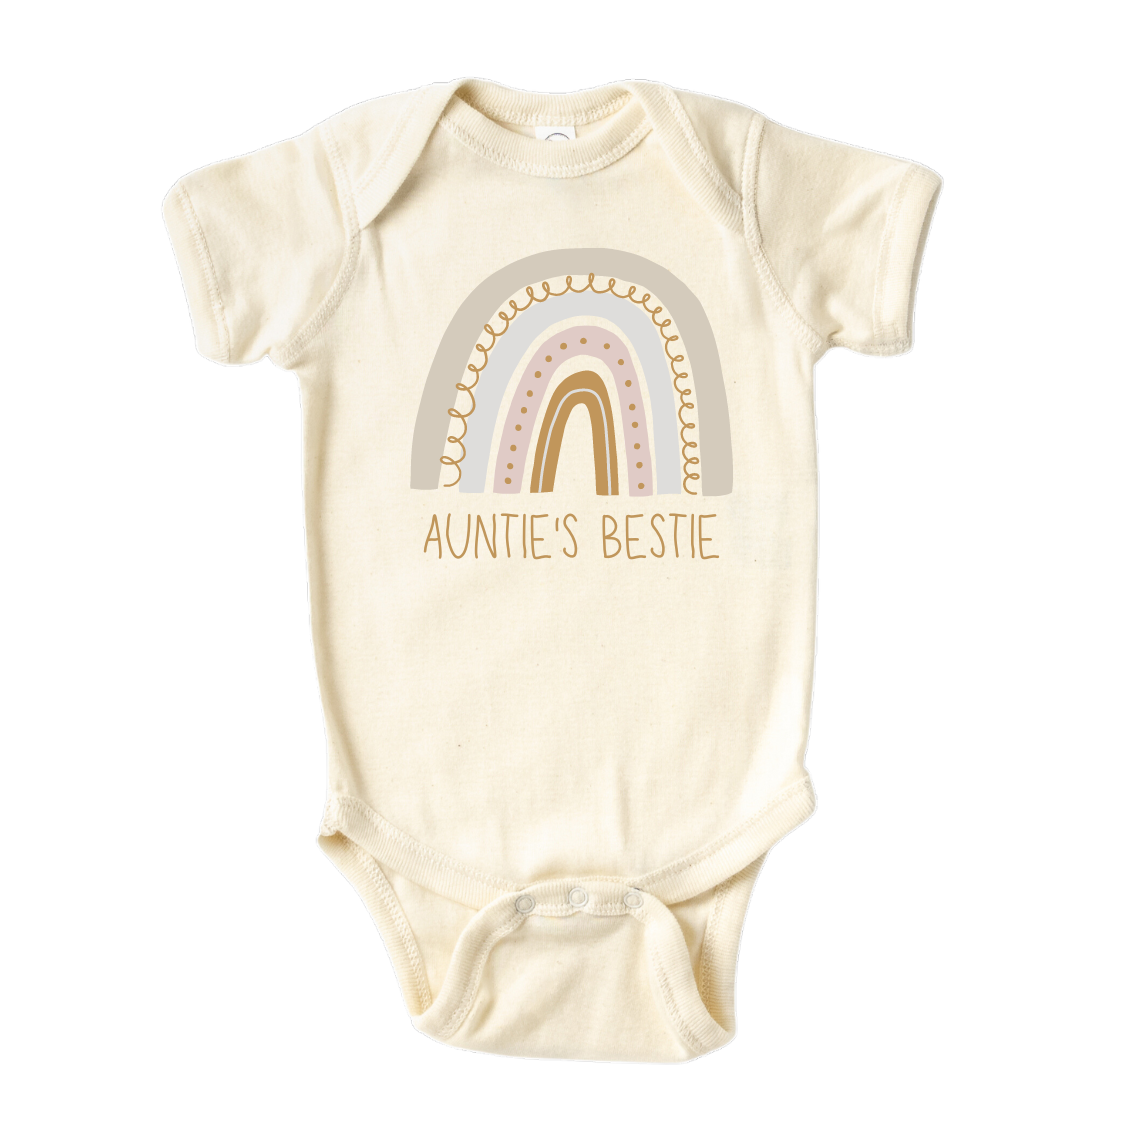 A colorful baby onesie adorned with a delightful printed graphic of a radiant rainbow and the text 'Auntie's Bestie.' This charming tee celebrates the cherished bond between a beloved aunt and her adored niece or nephew.